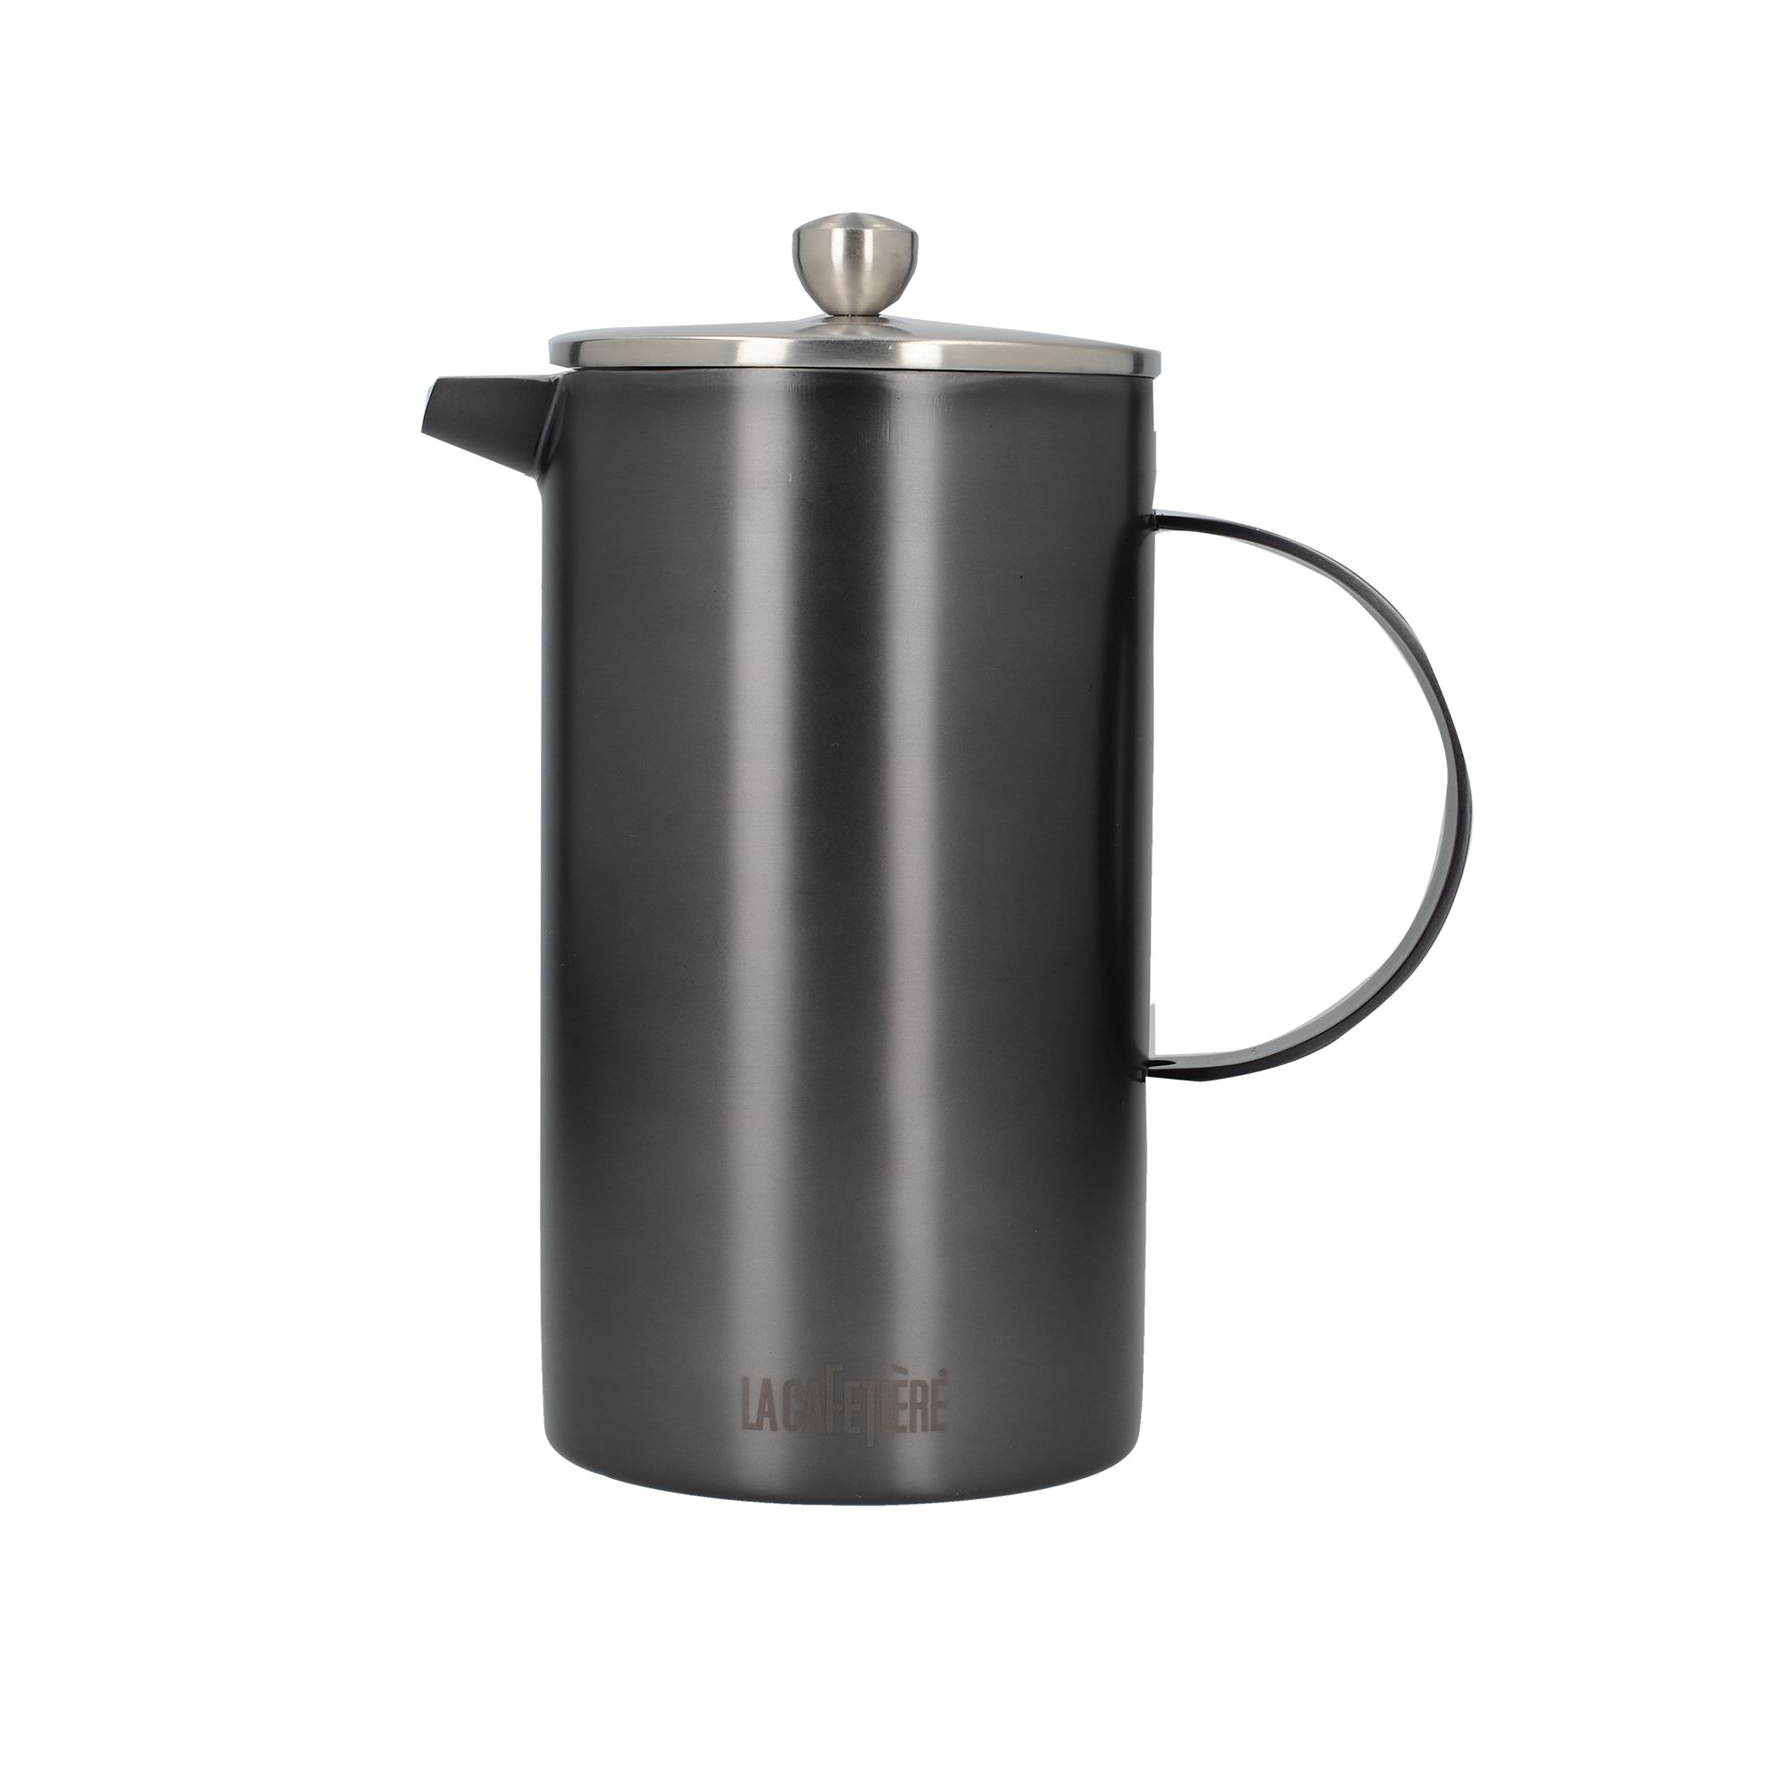 Brushed La Cafetiere Edited Double Walled 8 Cup Cafetiere Gun Metal Grey